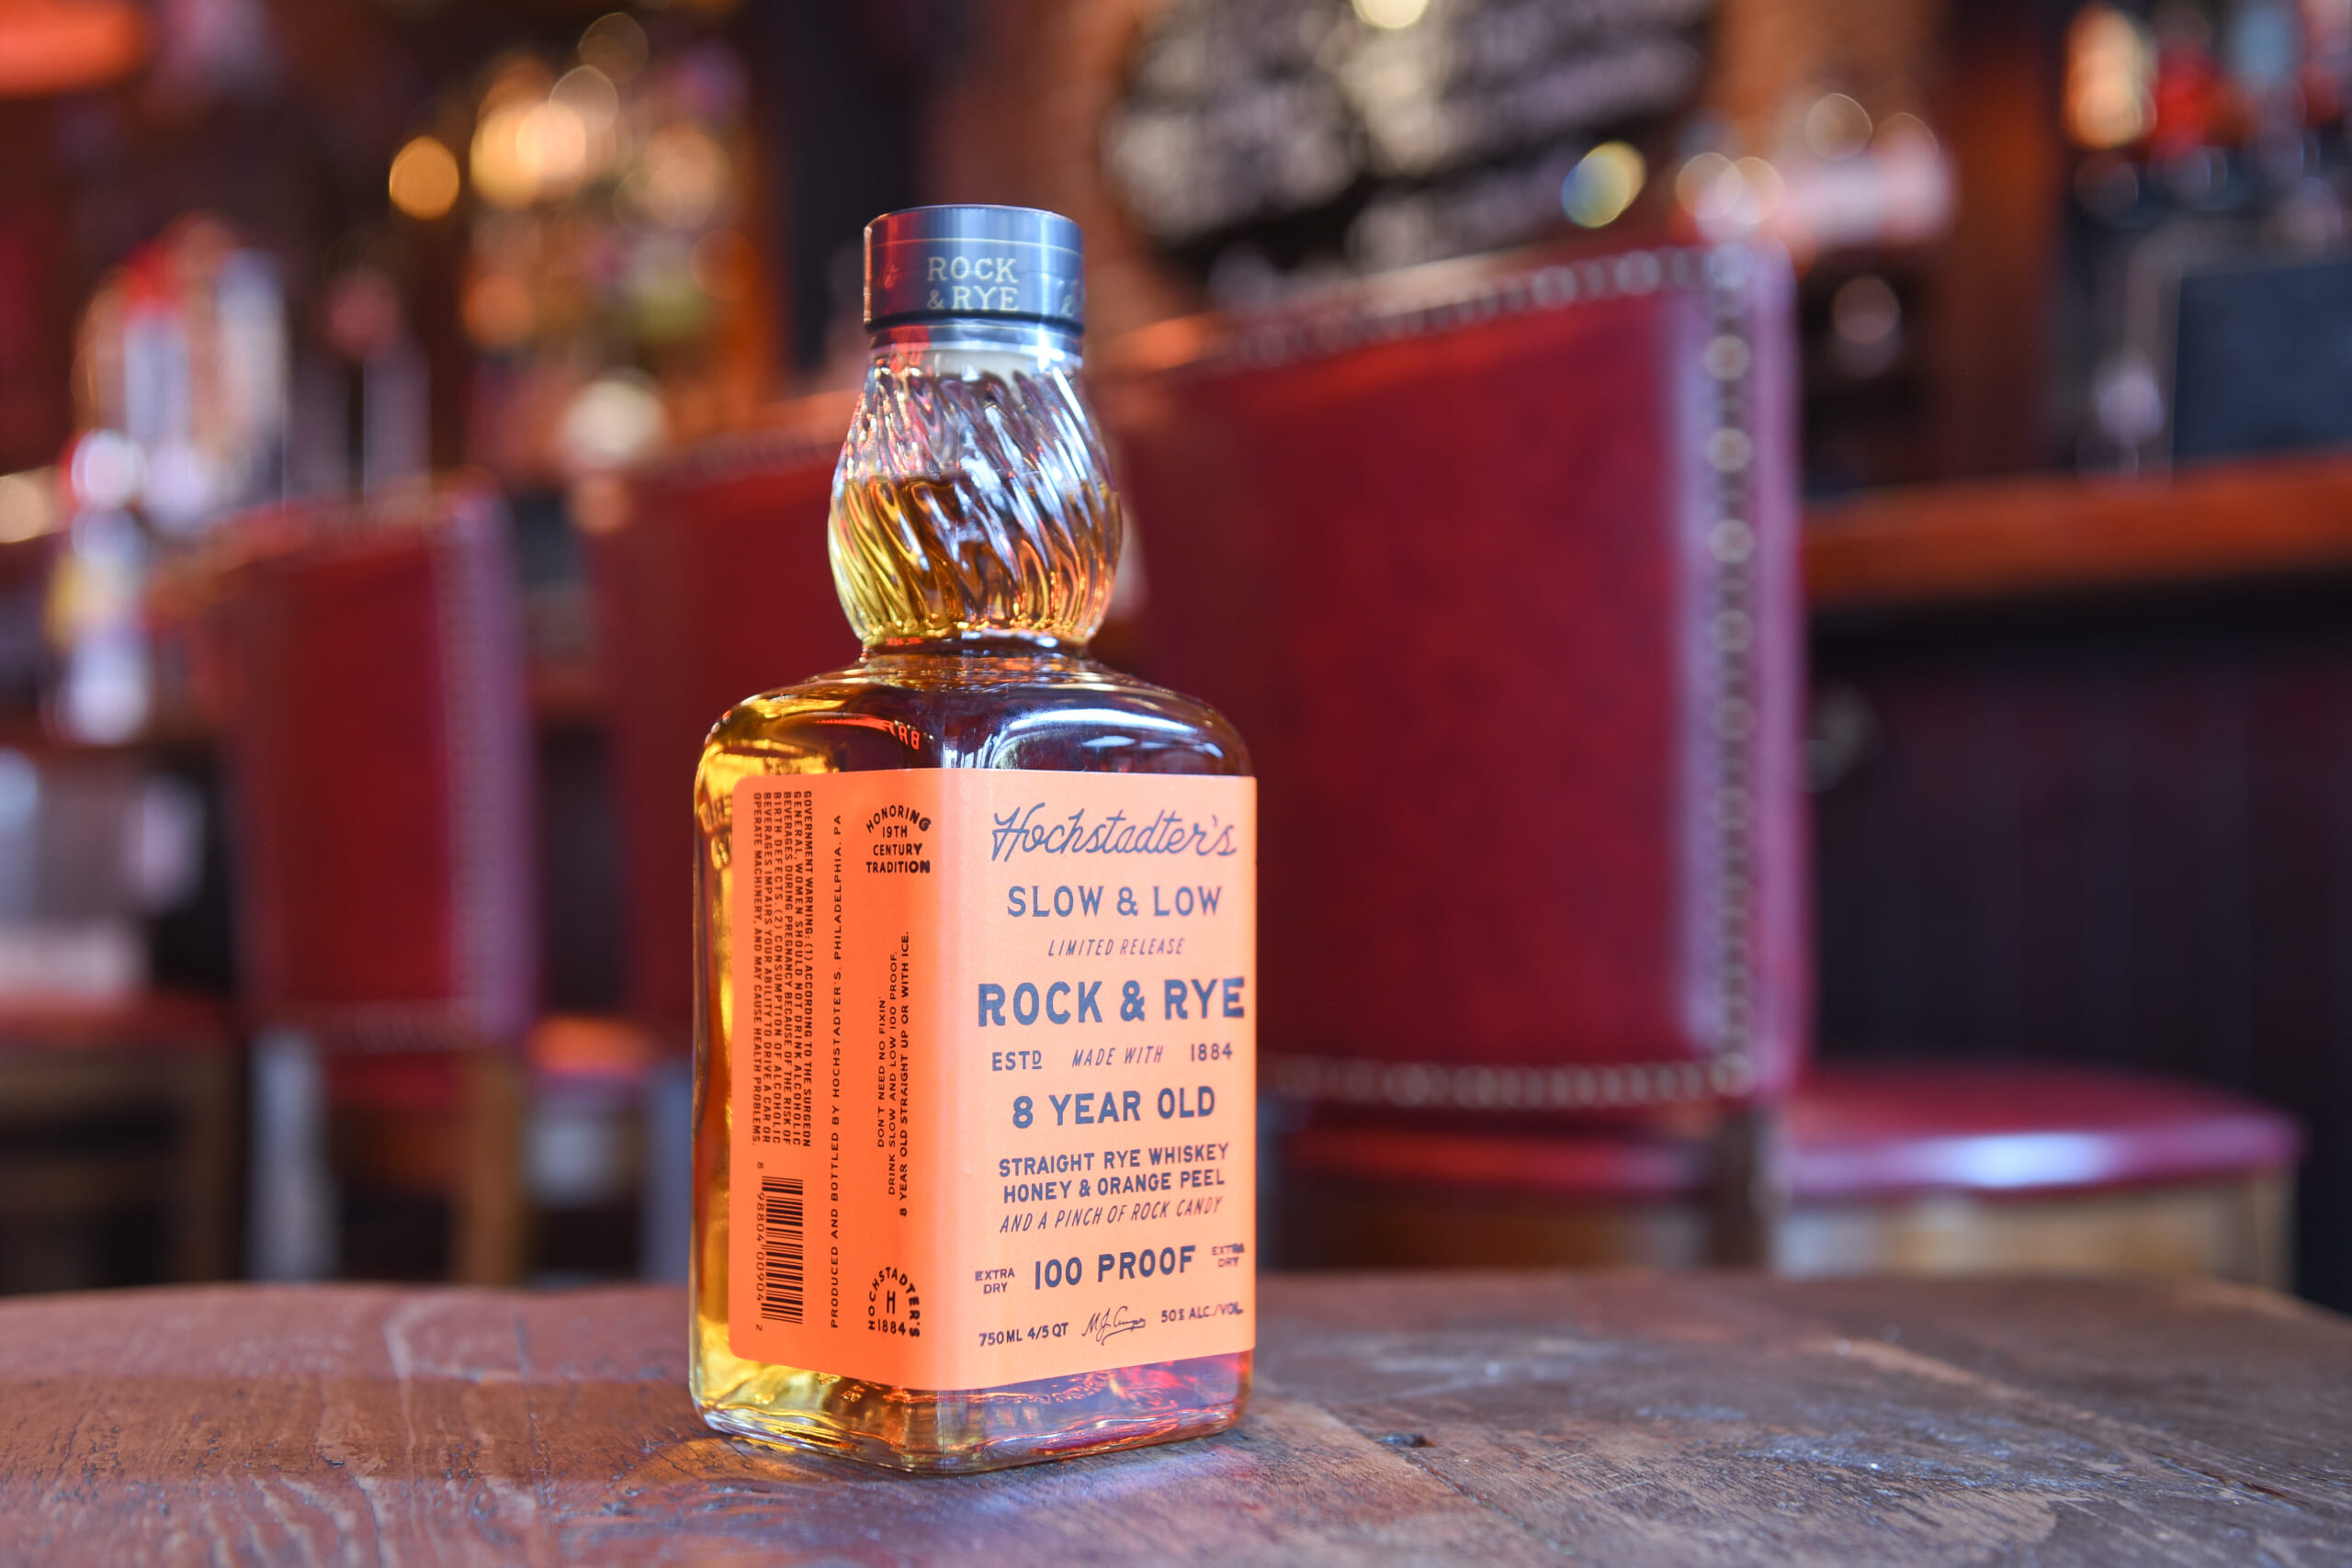 This 100 Proof Rye Whiskey Spiked With Rock Candy Is Sweet Relief - Maxim